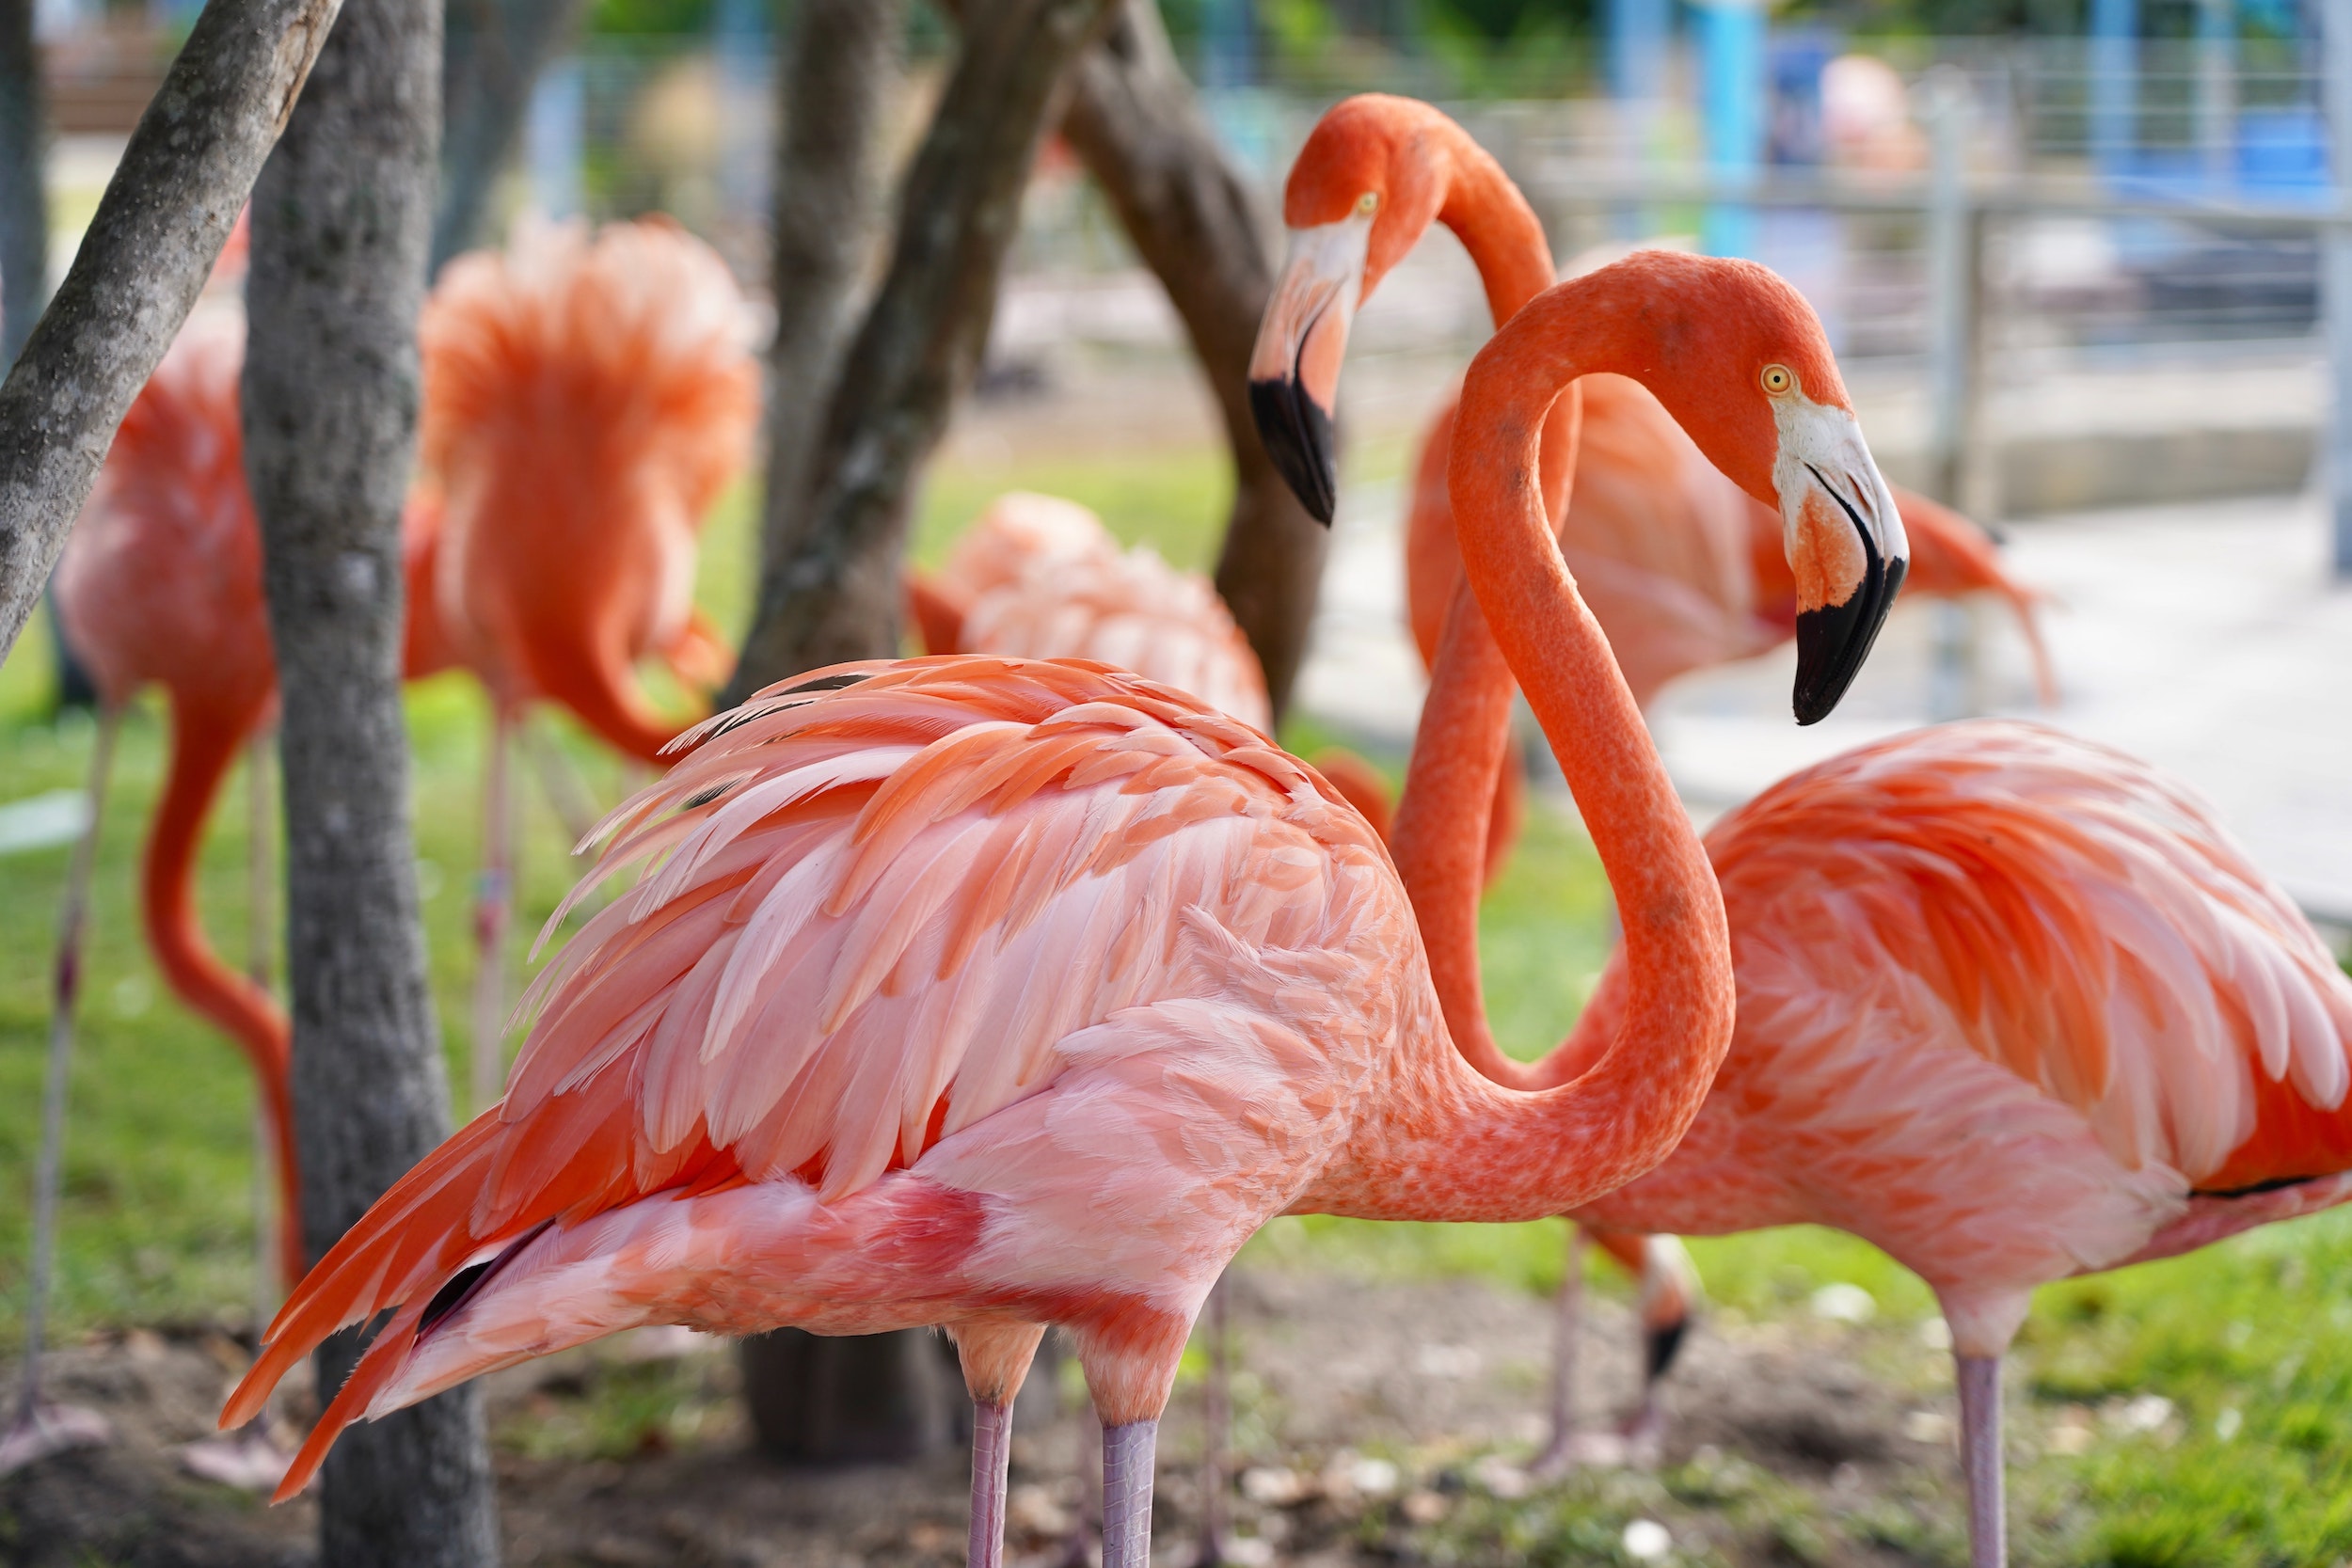 Pinker flamingos are more aggressive, intriguing study finds